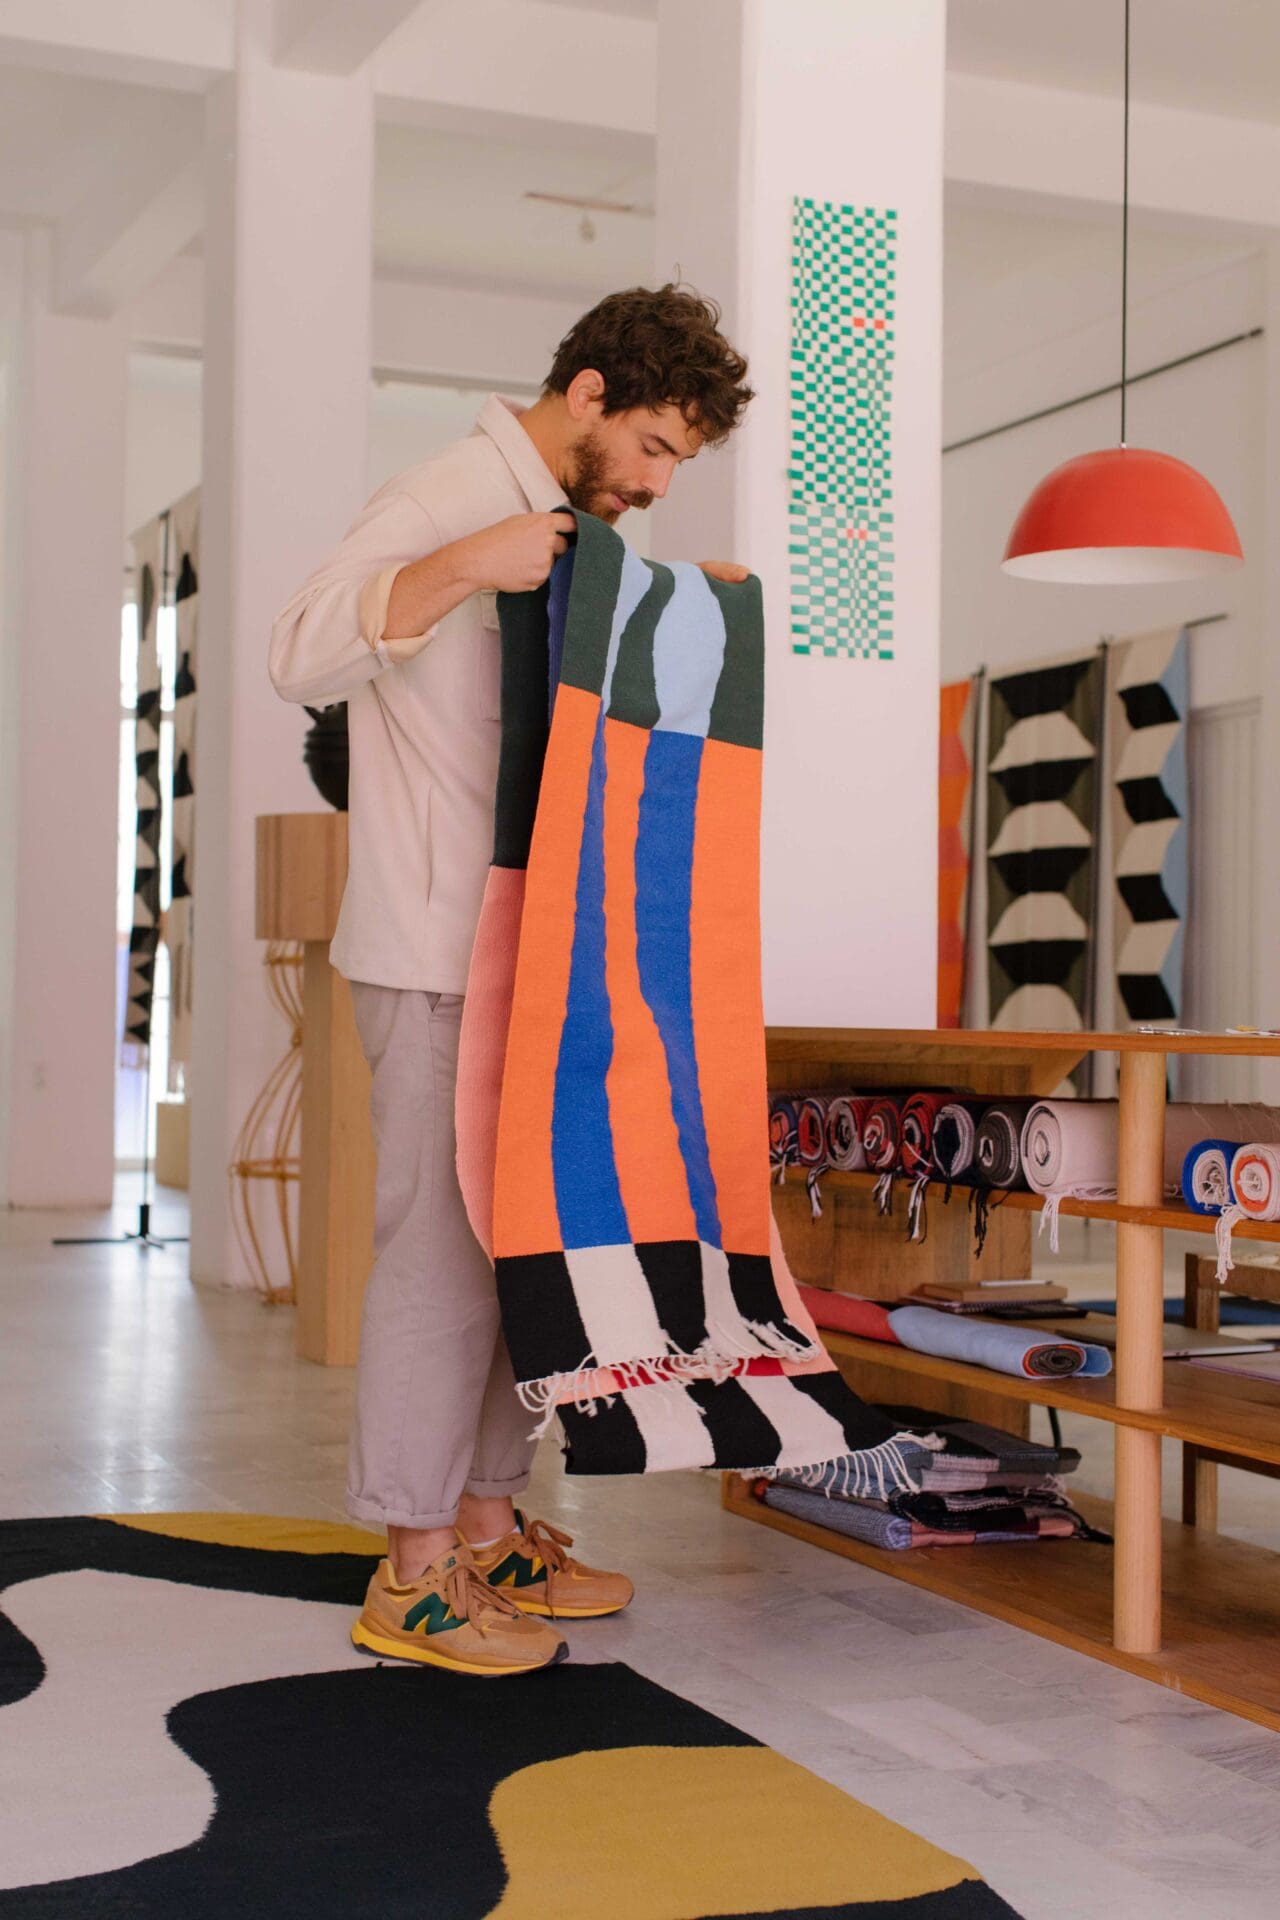 Javier Reyes, rrres studio, Oaxaca | the designer folds a piece of coloured, patterned fabric in a room with a concrete floor and a graphically patterned rug